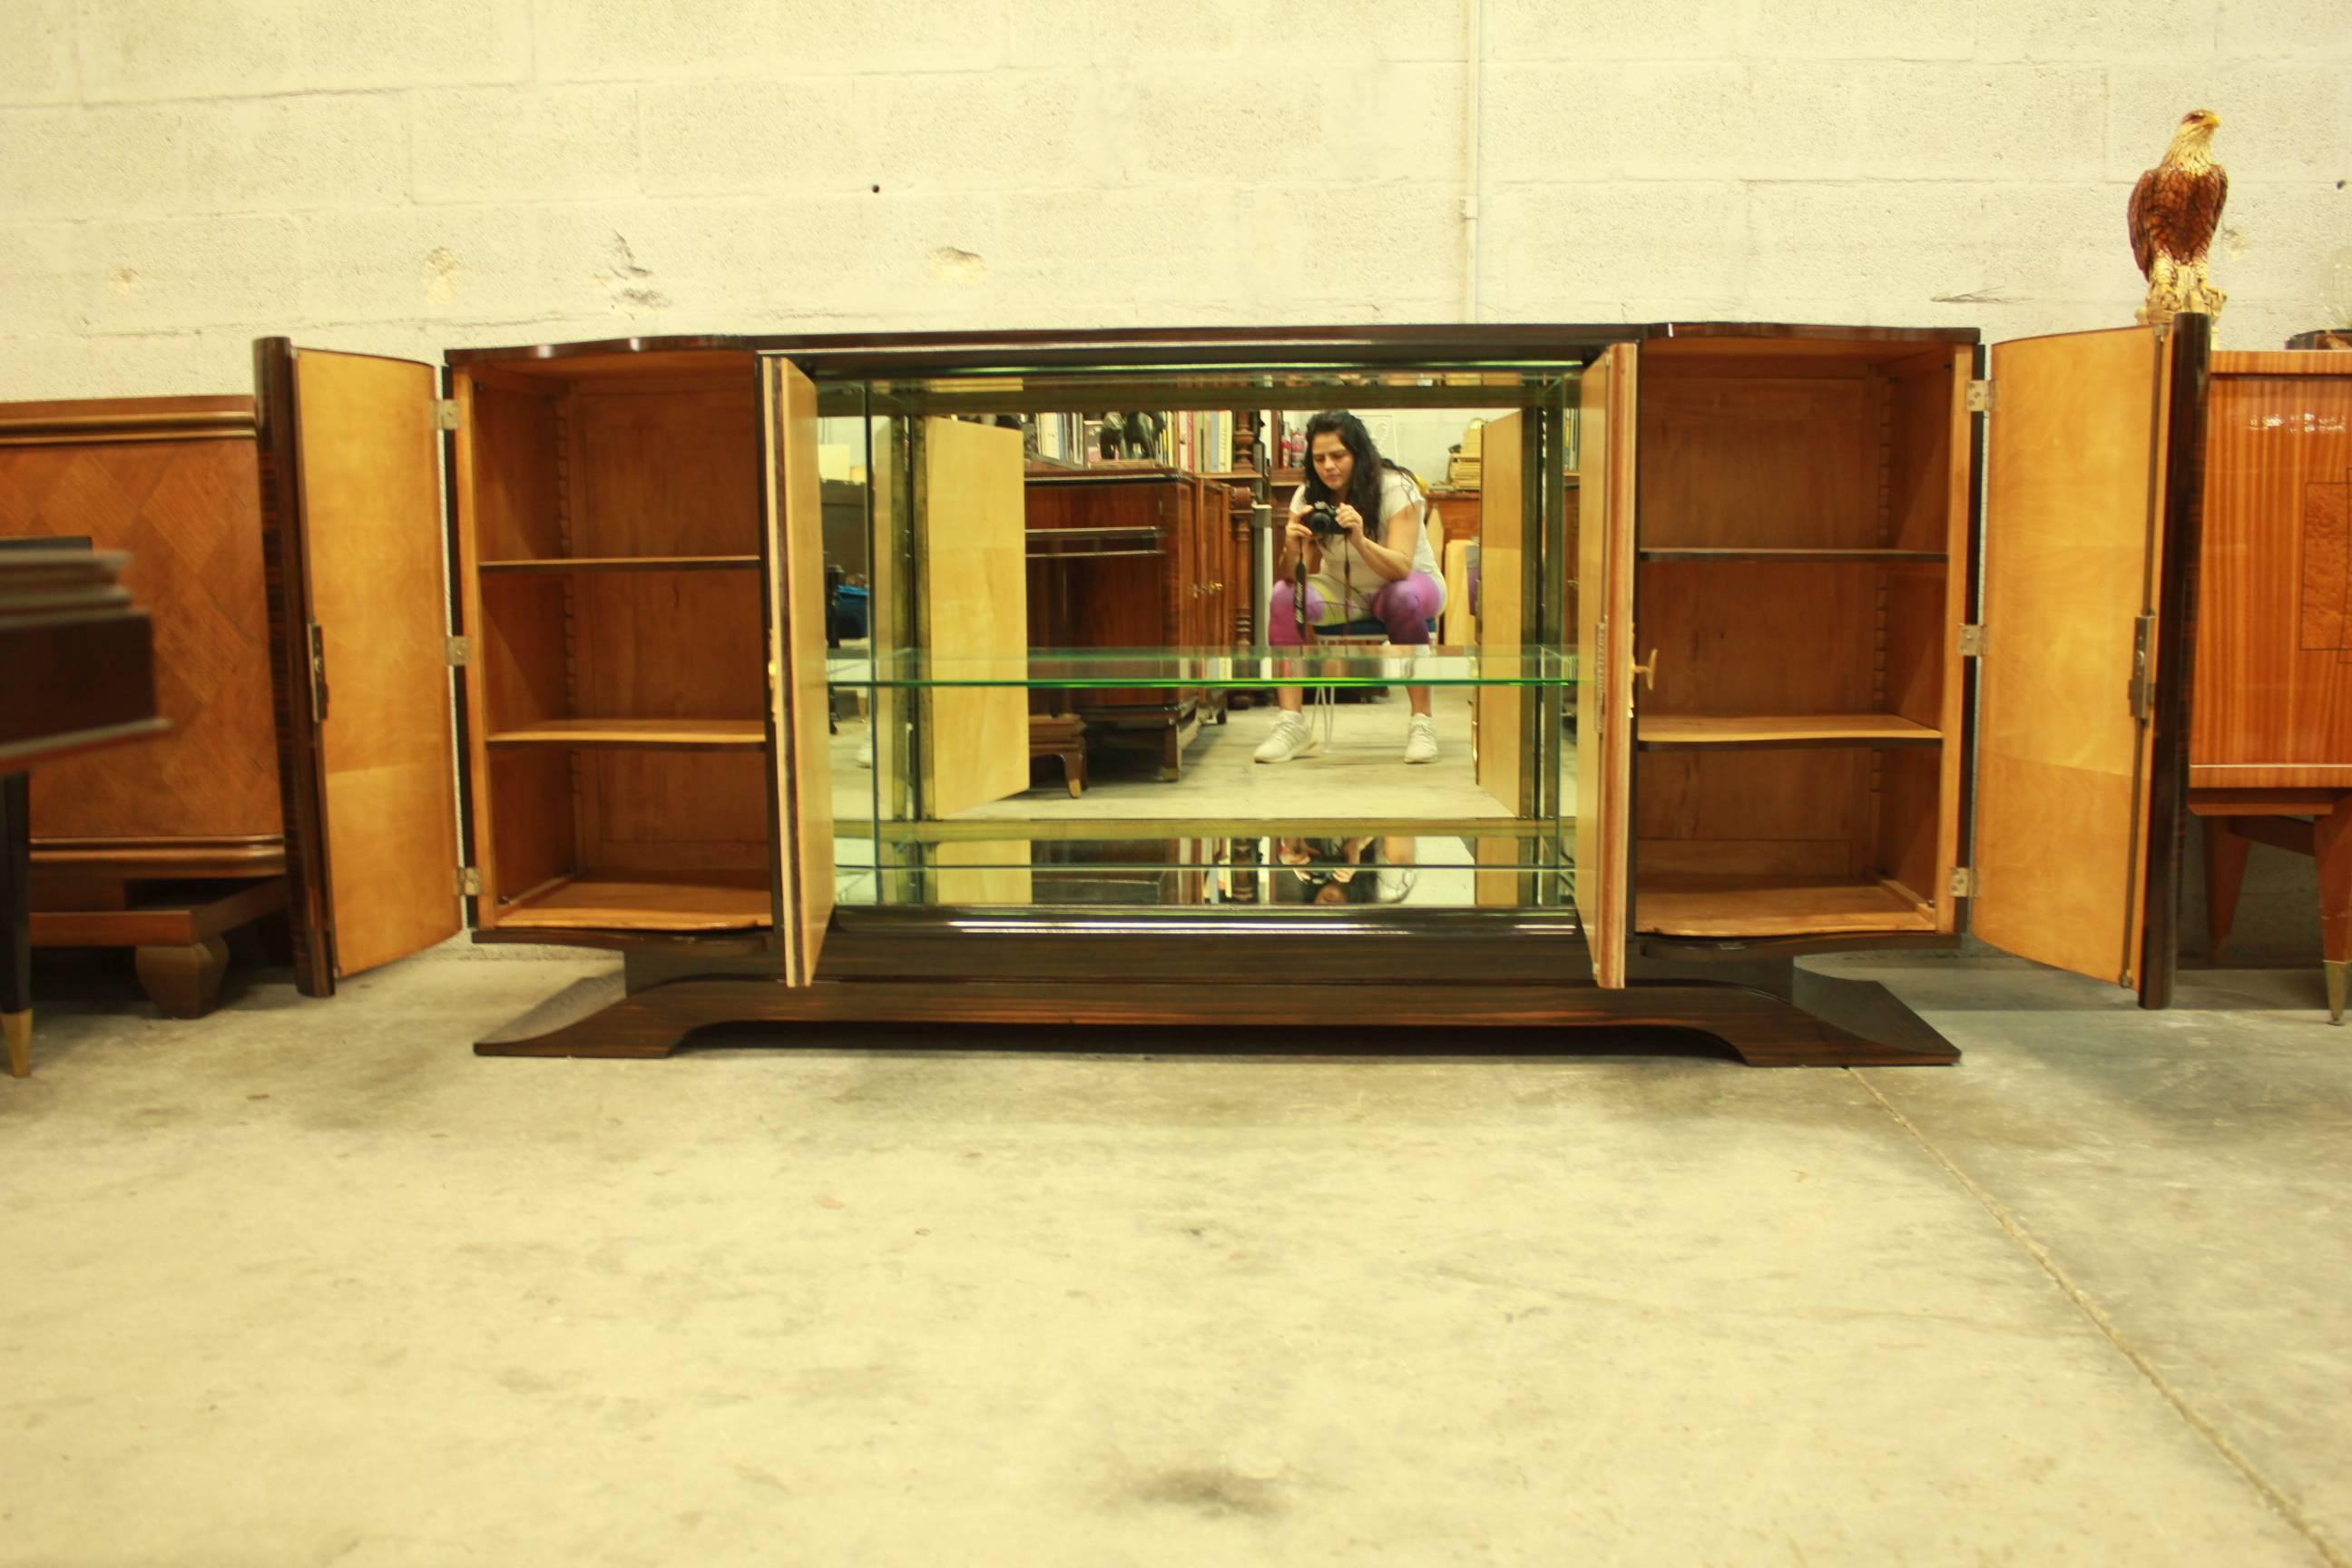 Beautiful masterpiece French Art Deco Macassar ebony, diamond parchment center doors, sideboard or bar designed by Maurice Rinck, completely refinished high gloss. With center bar mirror and shelves glass, sycamore wood interiors, all four wood